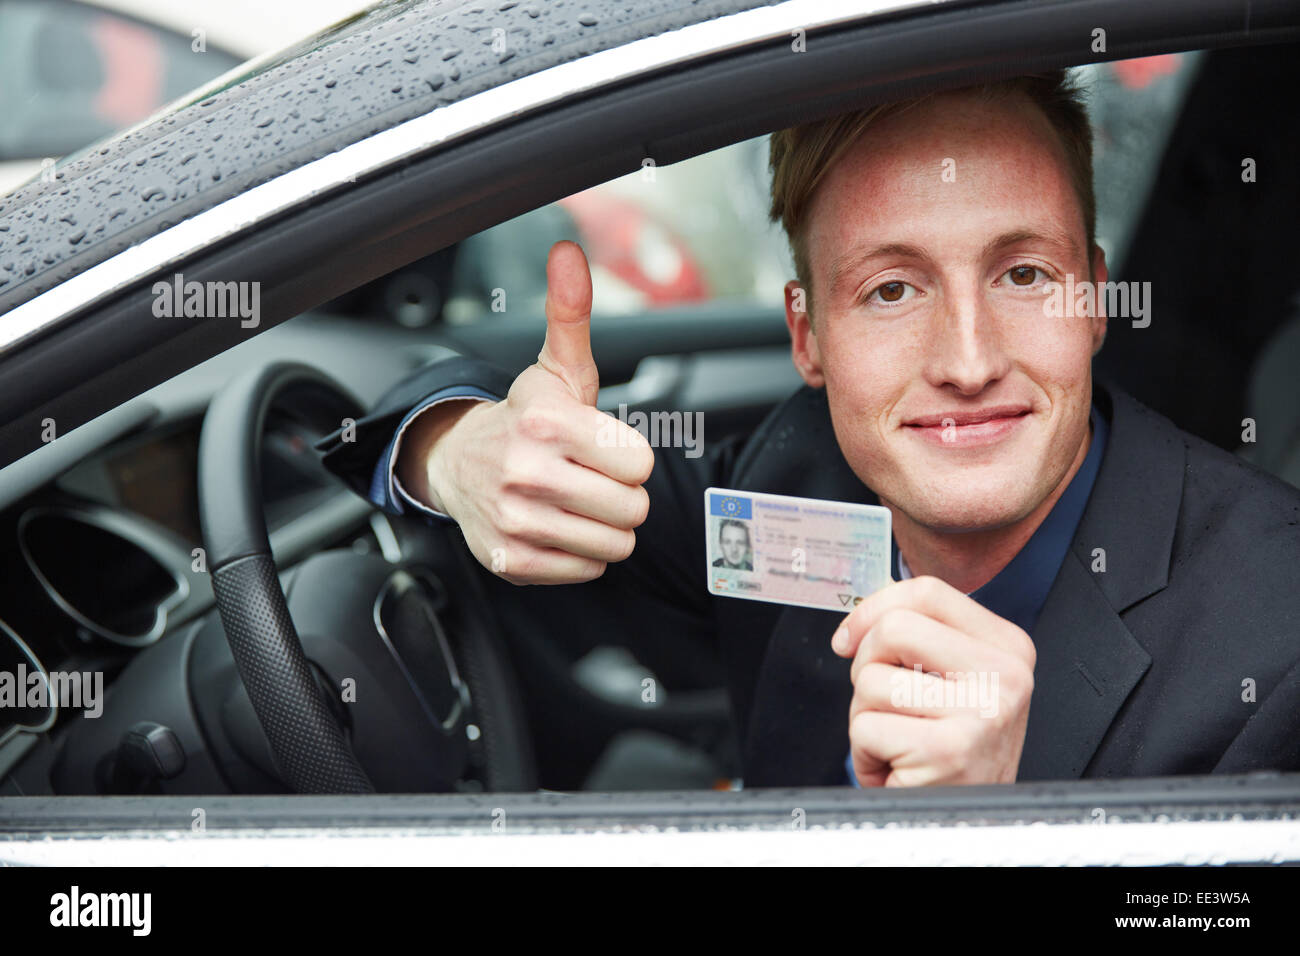 Young proud man in a car holding drivers licence and his thumps up Stock Photo